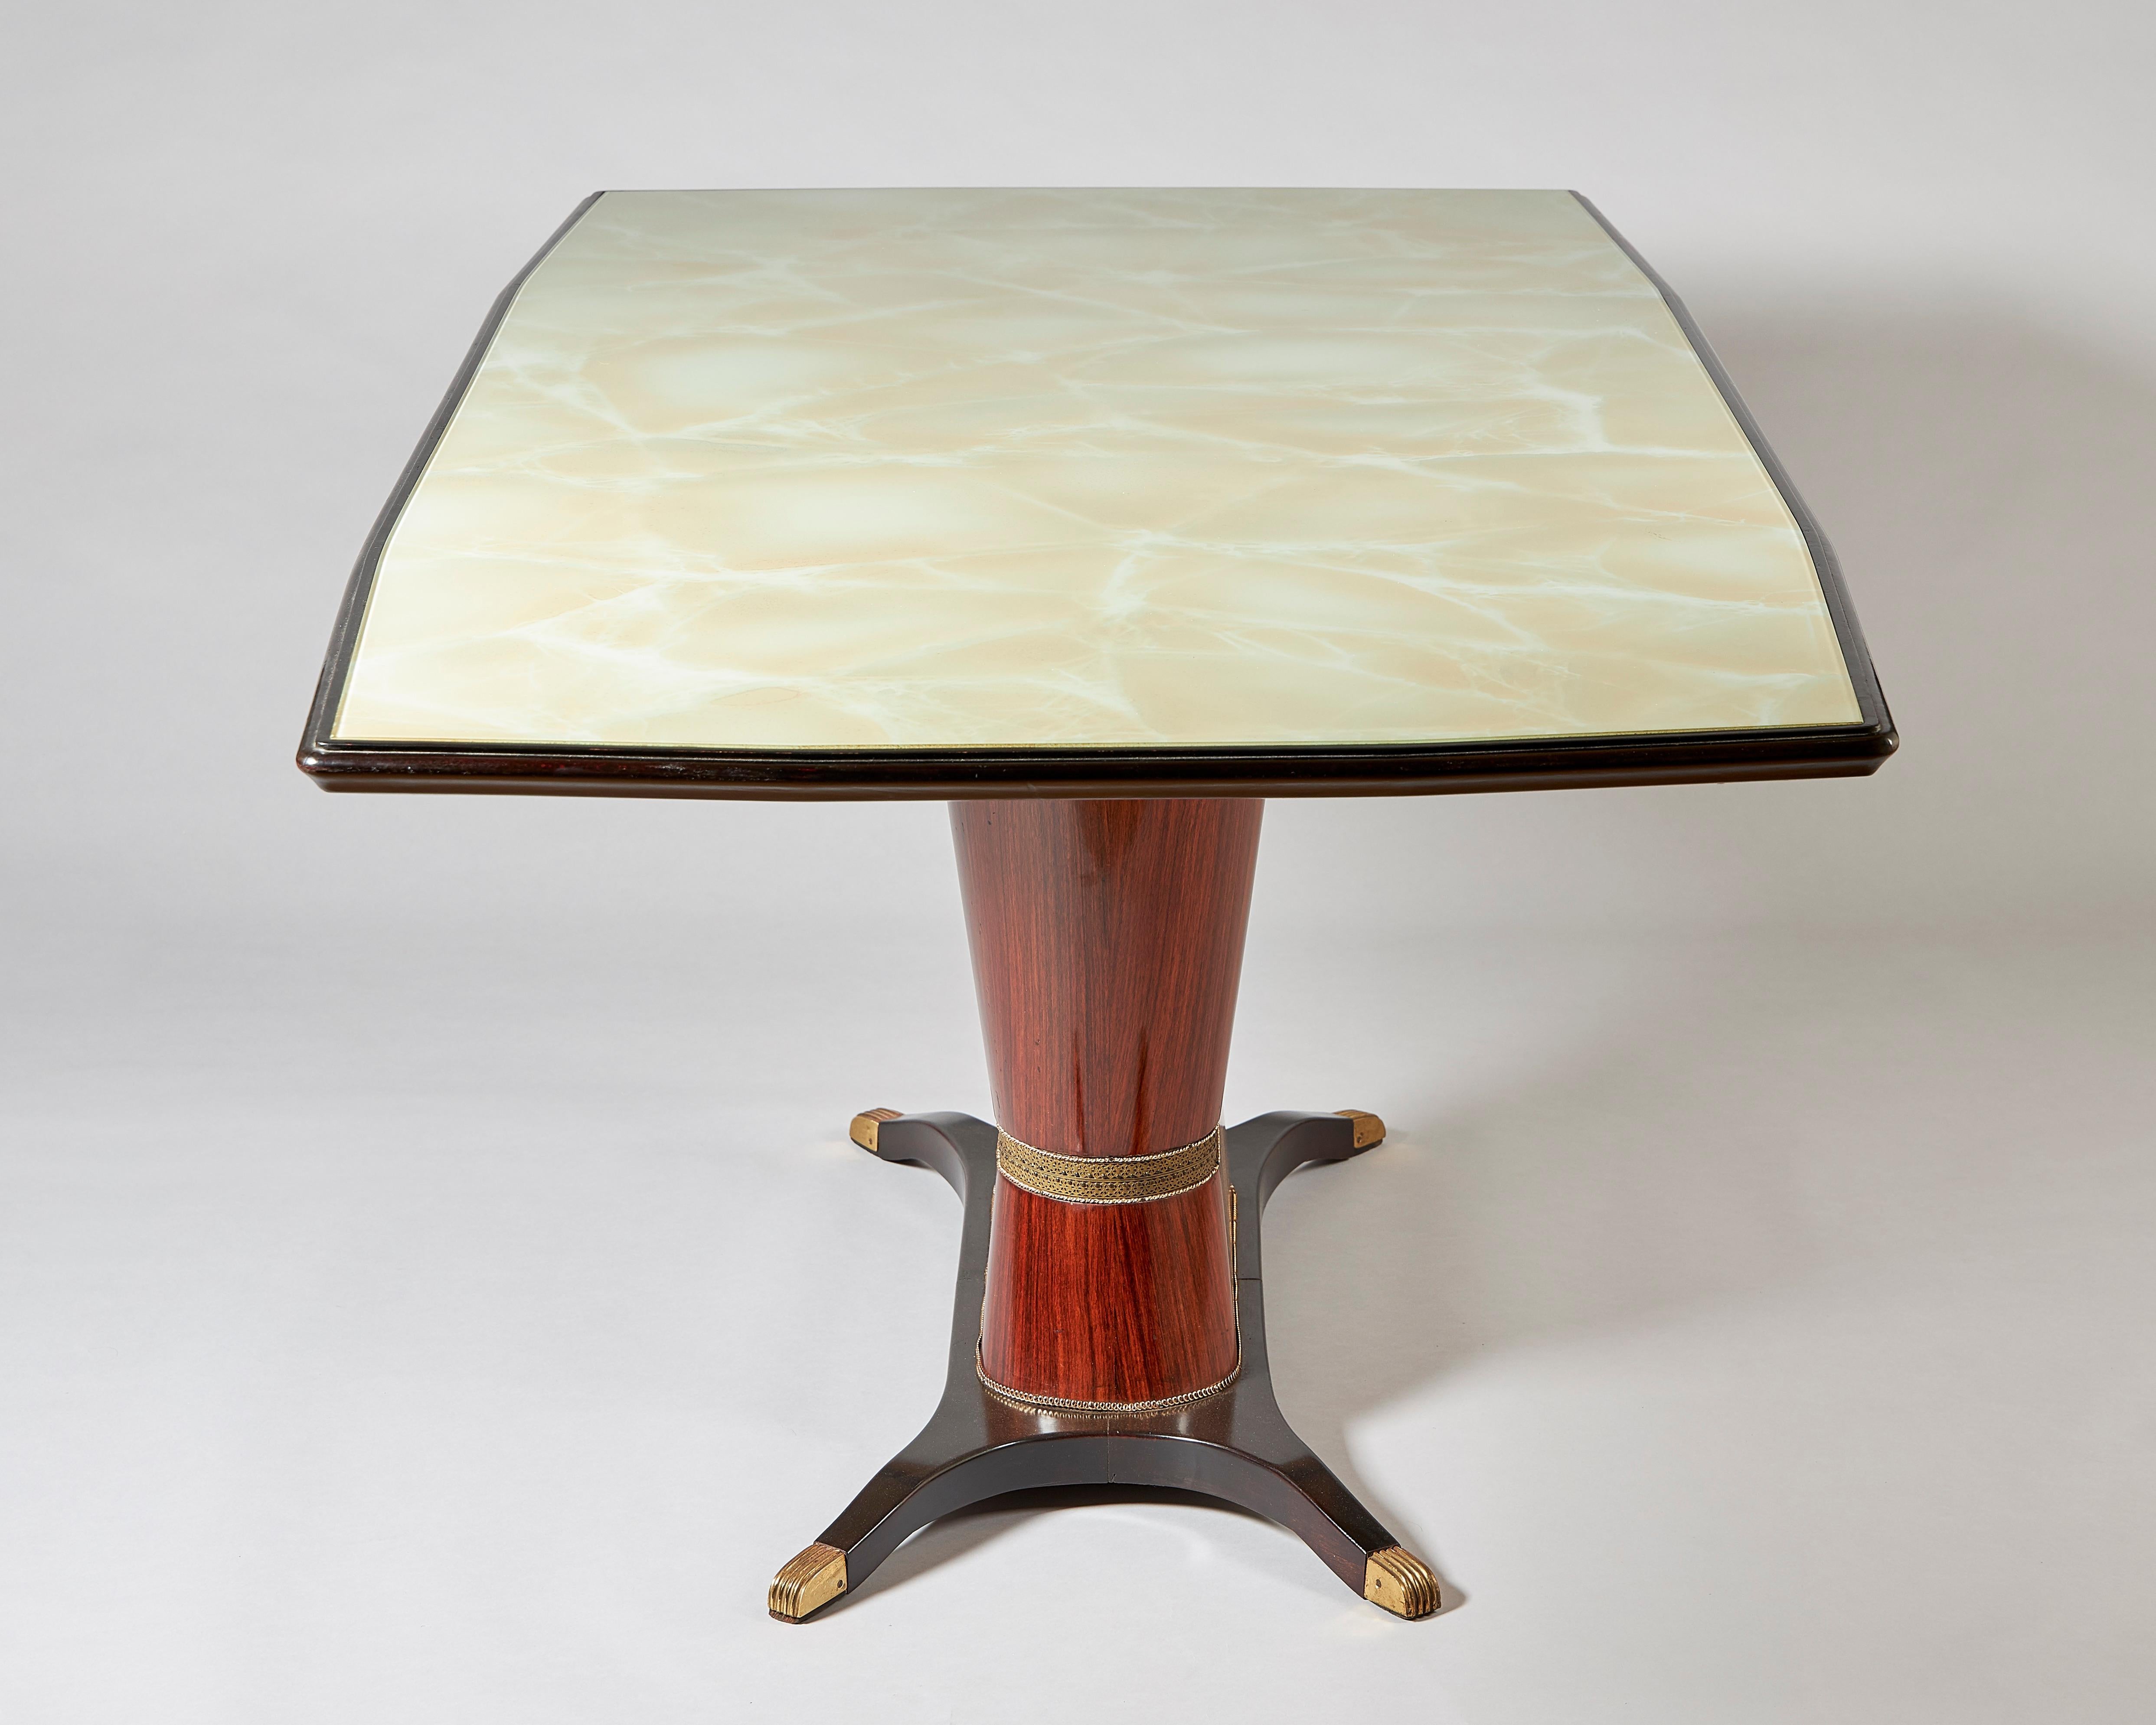 An Italian rosewood dining table, designed by Osvaldo Borsani, circa 1950.
With simulated onyx and glass top, the base with pierced brass inlay.